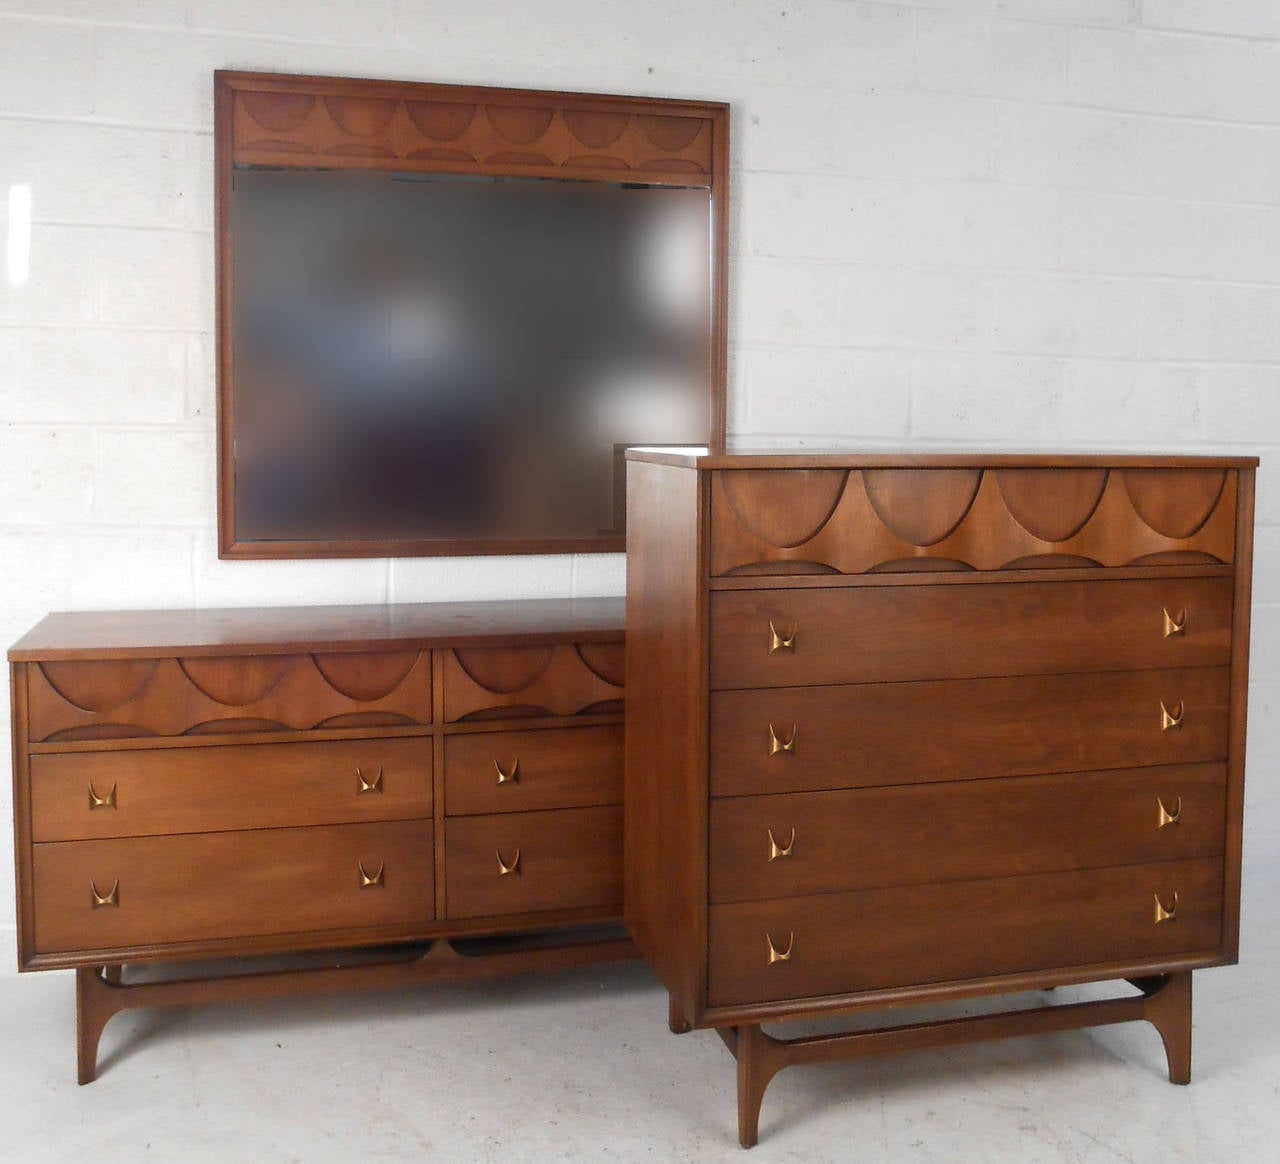 This matching three piece bedroom set showcases the wonderful Brasilia style made so popular by mid-century Broyhill manufacturing. With unique drawer pulls, sculpted drawer fronts, and plenty of drawer space this mid-century bedroom set is the